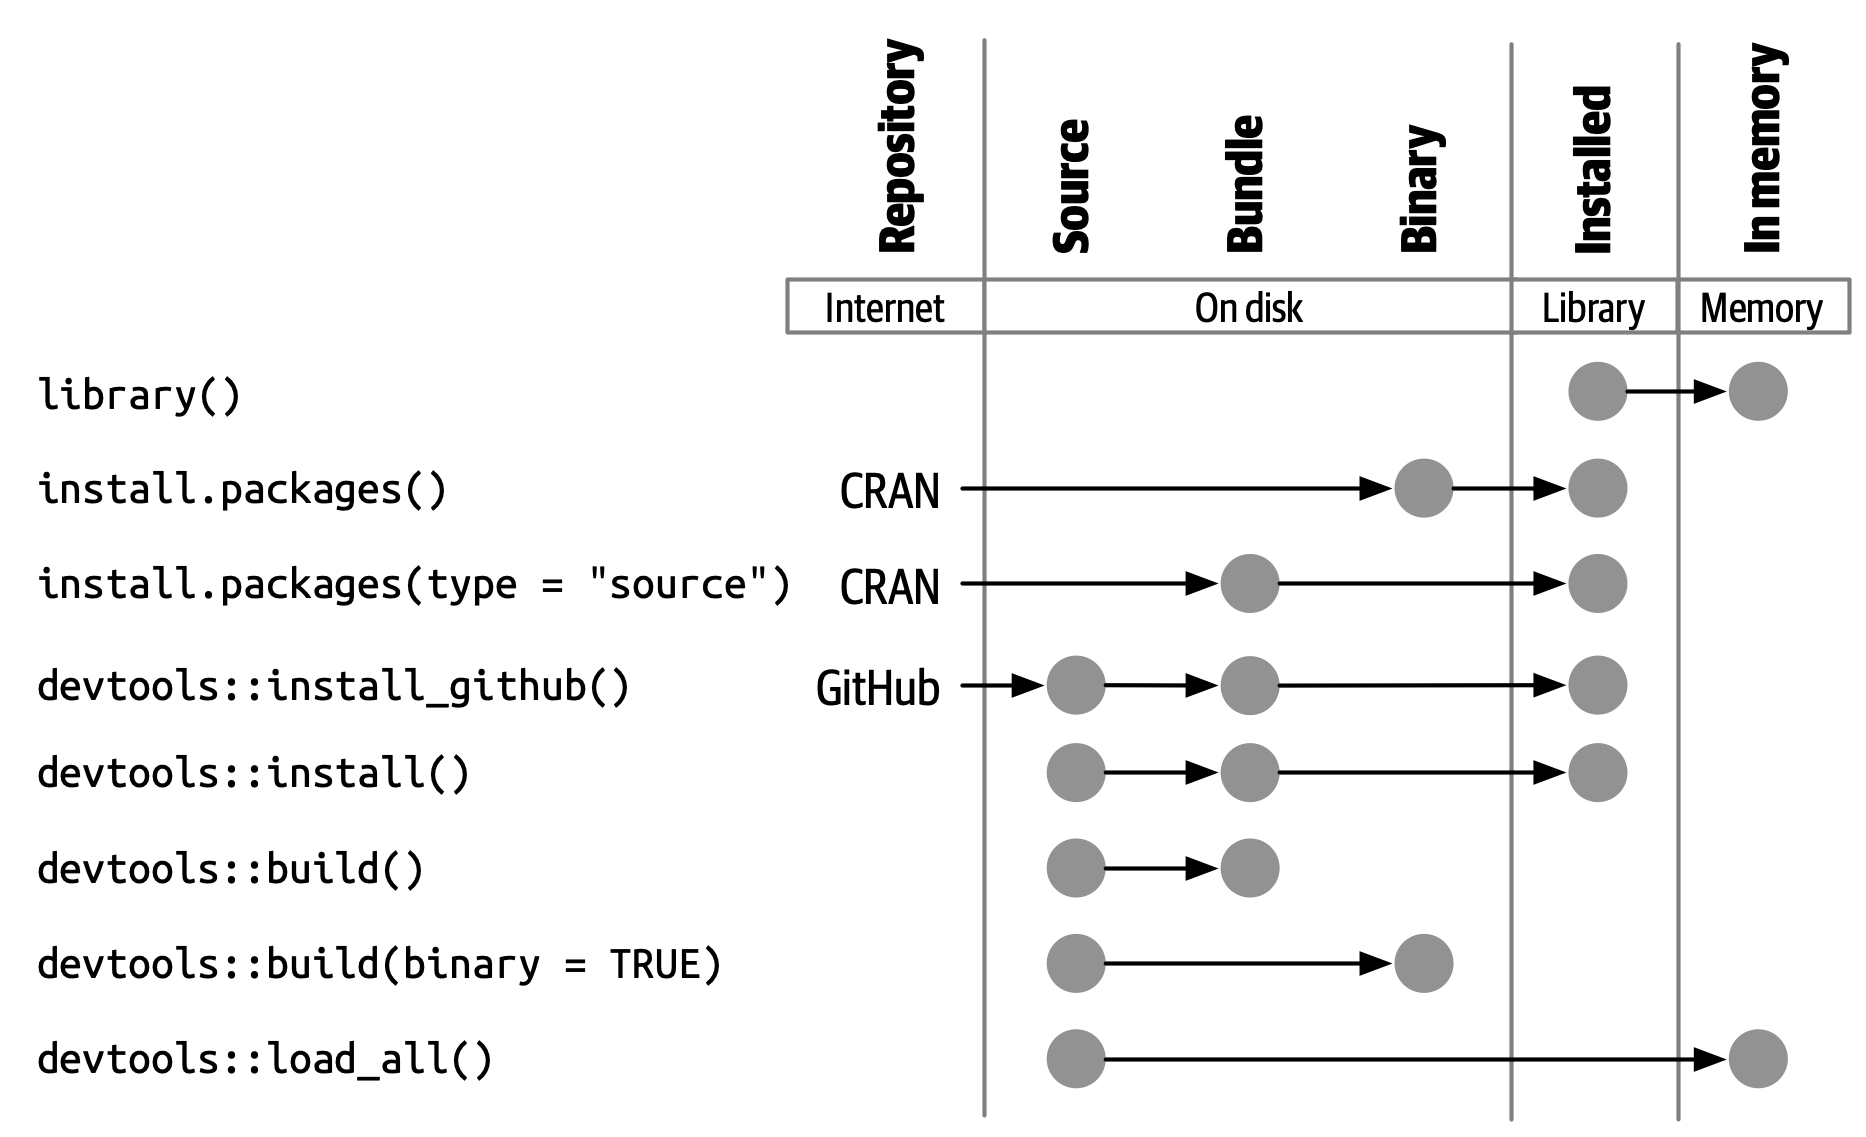 R Packages 2e, Figure 3.2. A chart showing different ways to go from one package state to another: 1. library() puts an installed package into memory. 2. Functions such as install.packages(), devtools::install_github(), and devtools::install() can install a package starting variously in the source, bundle, or binary forms. 3. devtools::build() can create a bundle or a binary. 4. devtools::load_all() puts a source package into memory.